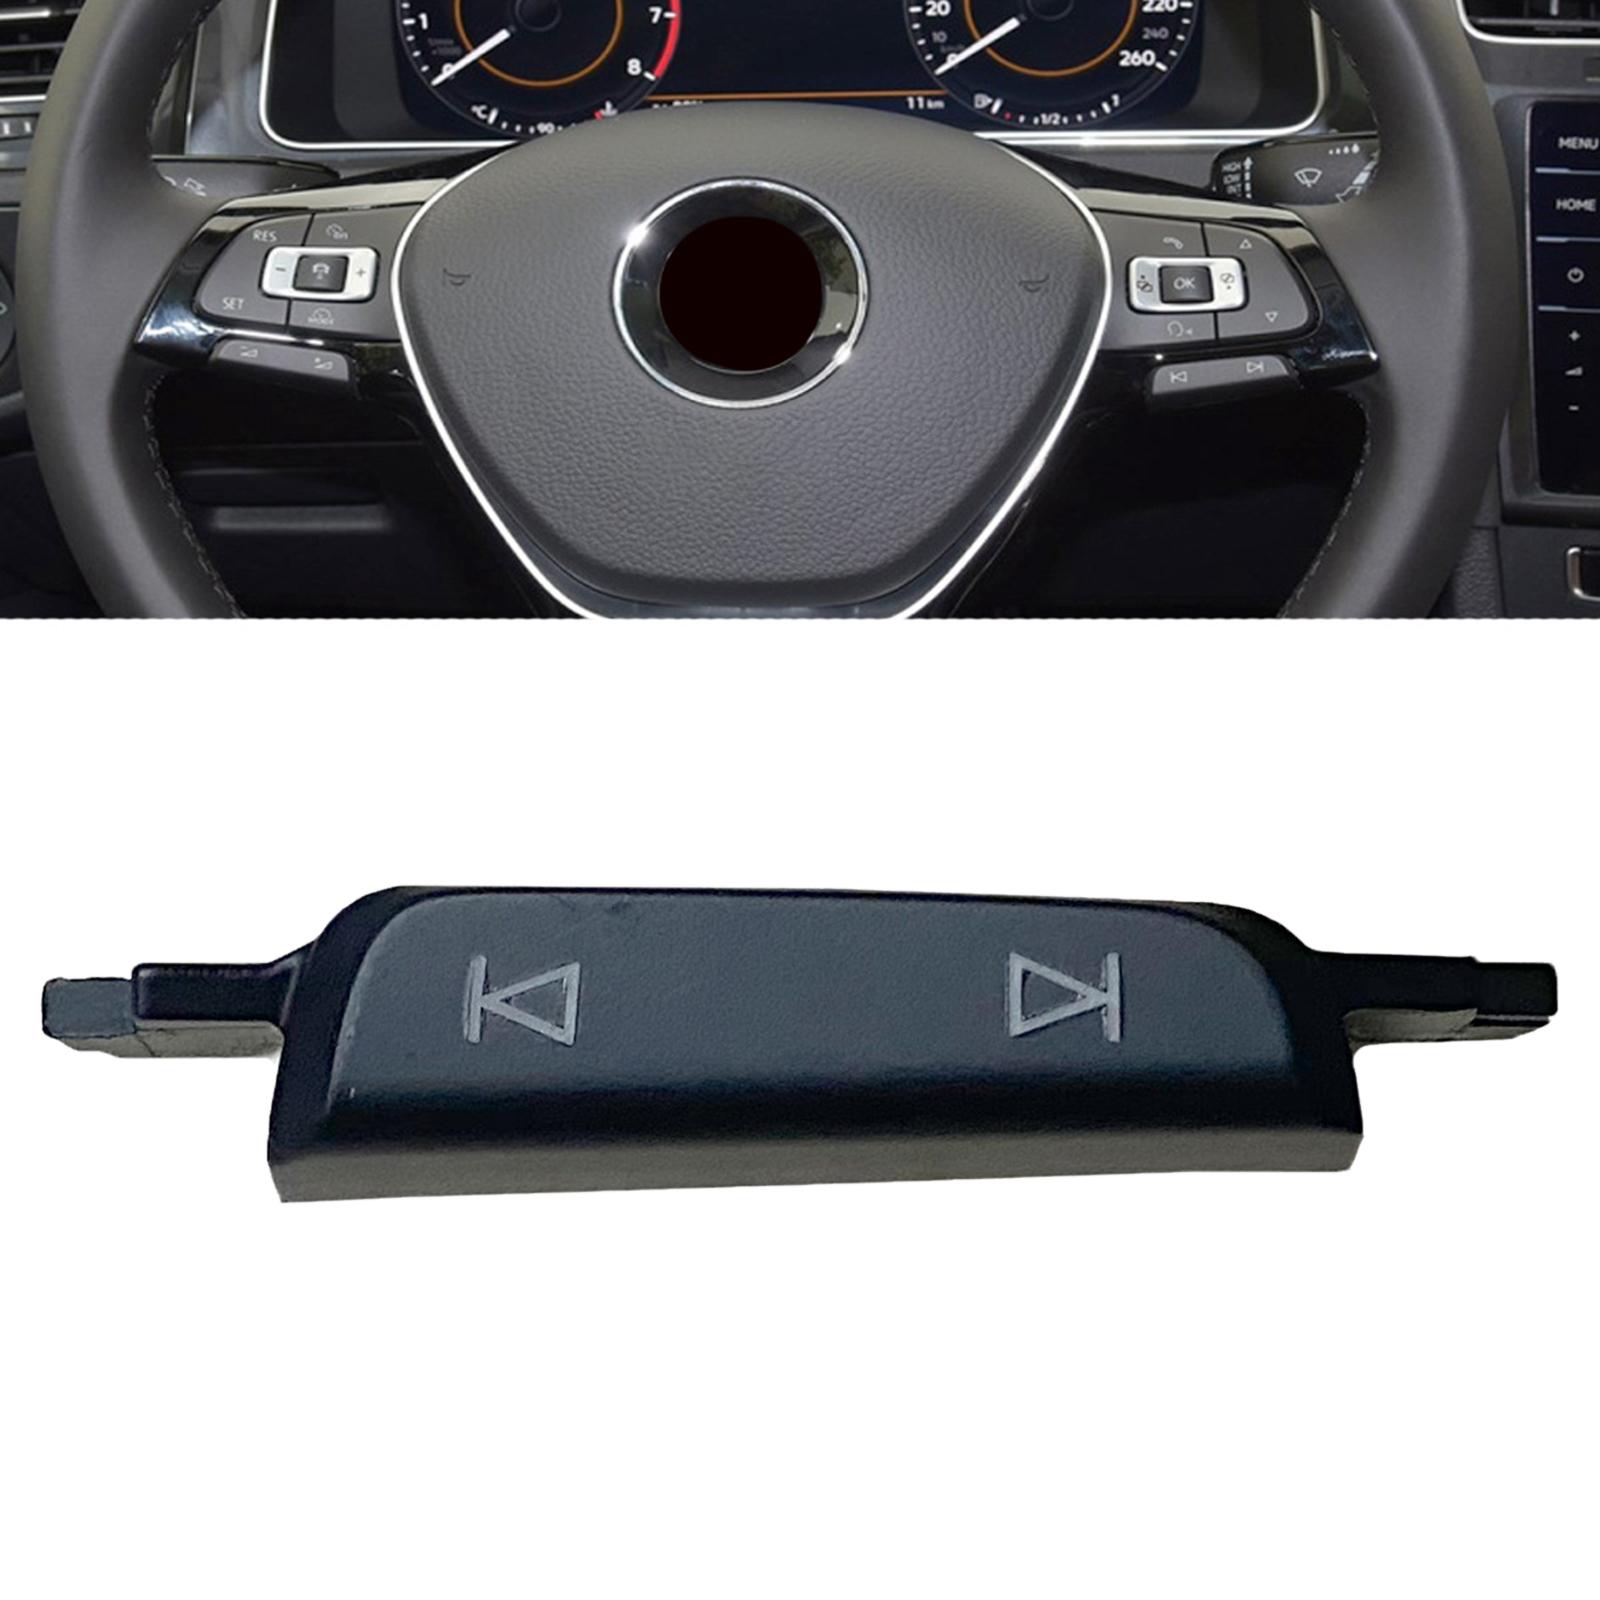 Multifunction Steering Wheel Button Switch for VW Golf MK7 Passat Jetta Song Select Button